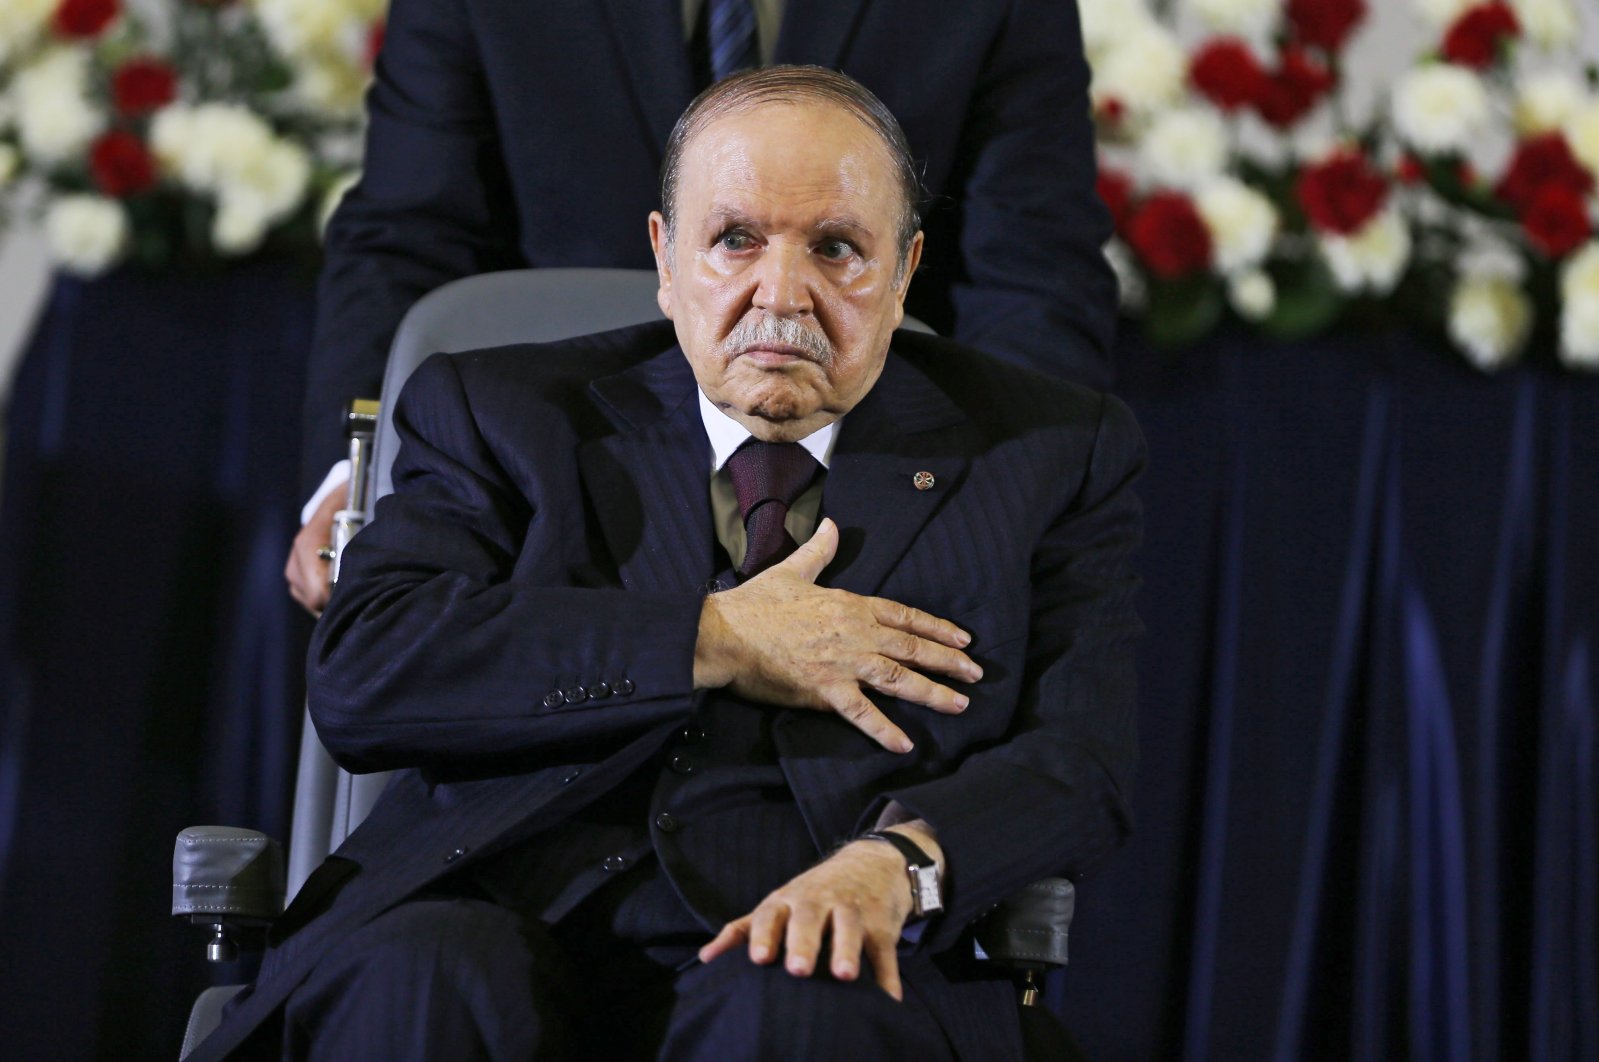  Algerian President Abdelaziz Bouteflika, re-elected for a fourth mandate, reacts during the oath-taking ceremony in Algiers, Algeria, April 28, 2014. (EPA Photo)